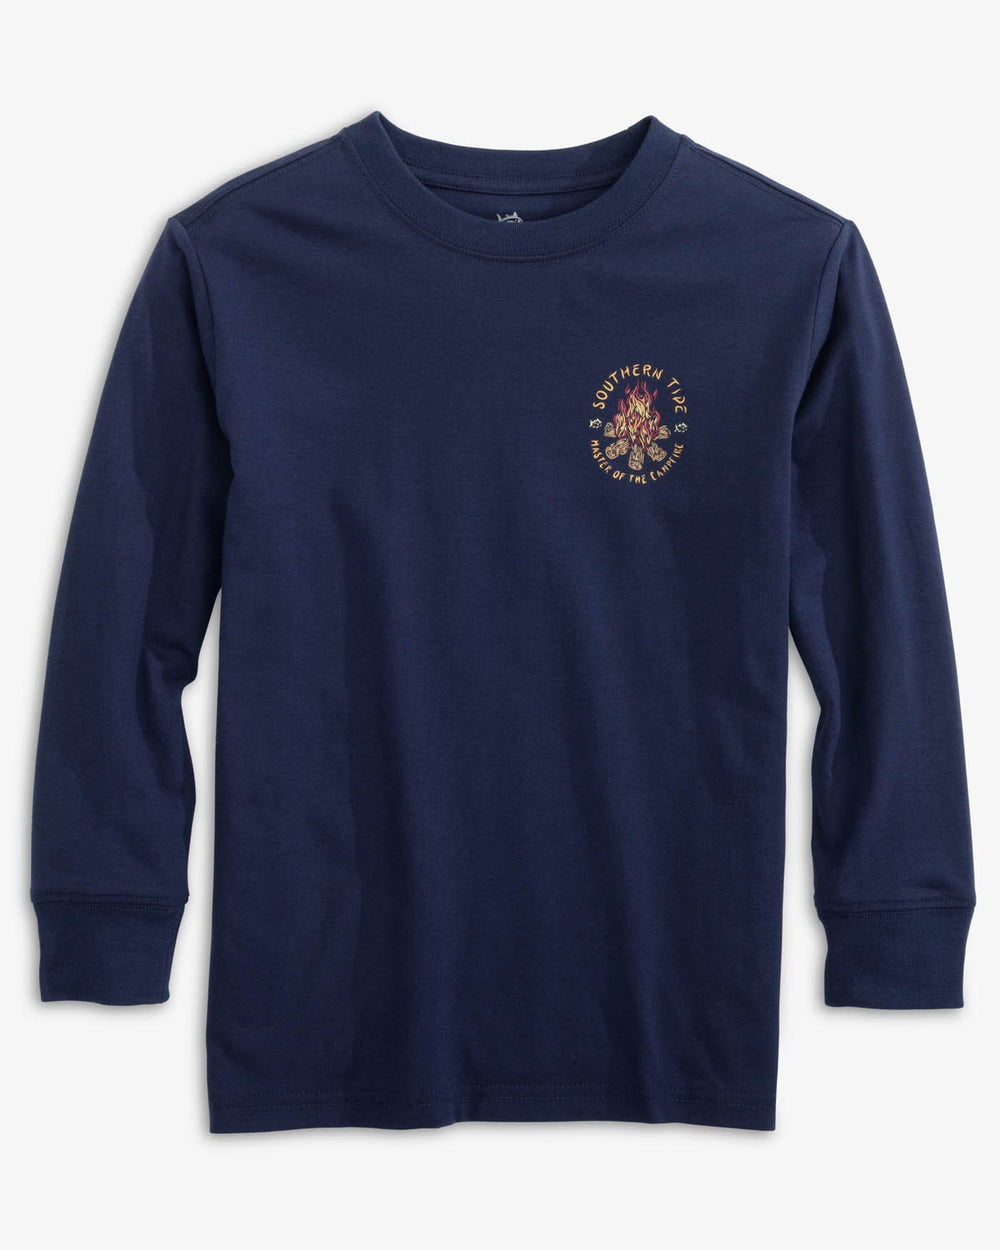 The front view of the Southern Tide Kids Master of the Campfire Long Sleeve T-Shirt by Southern Tide - Nautical Navy